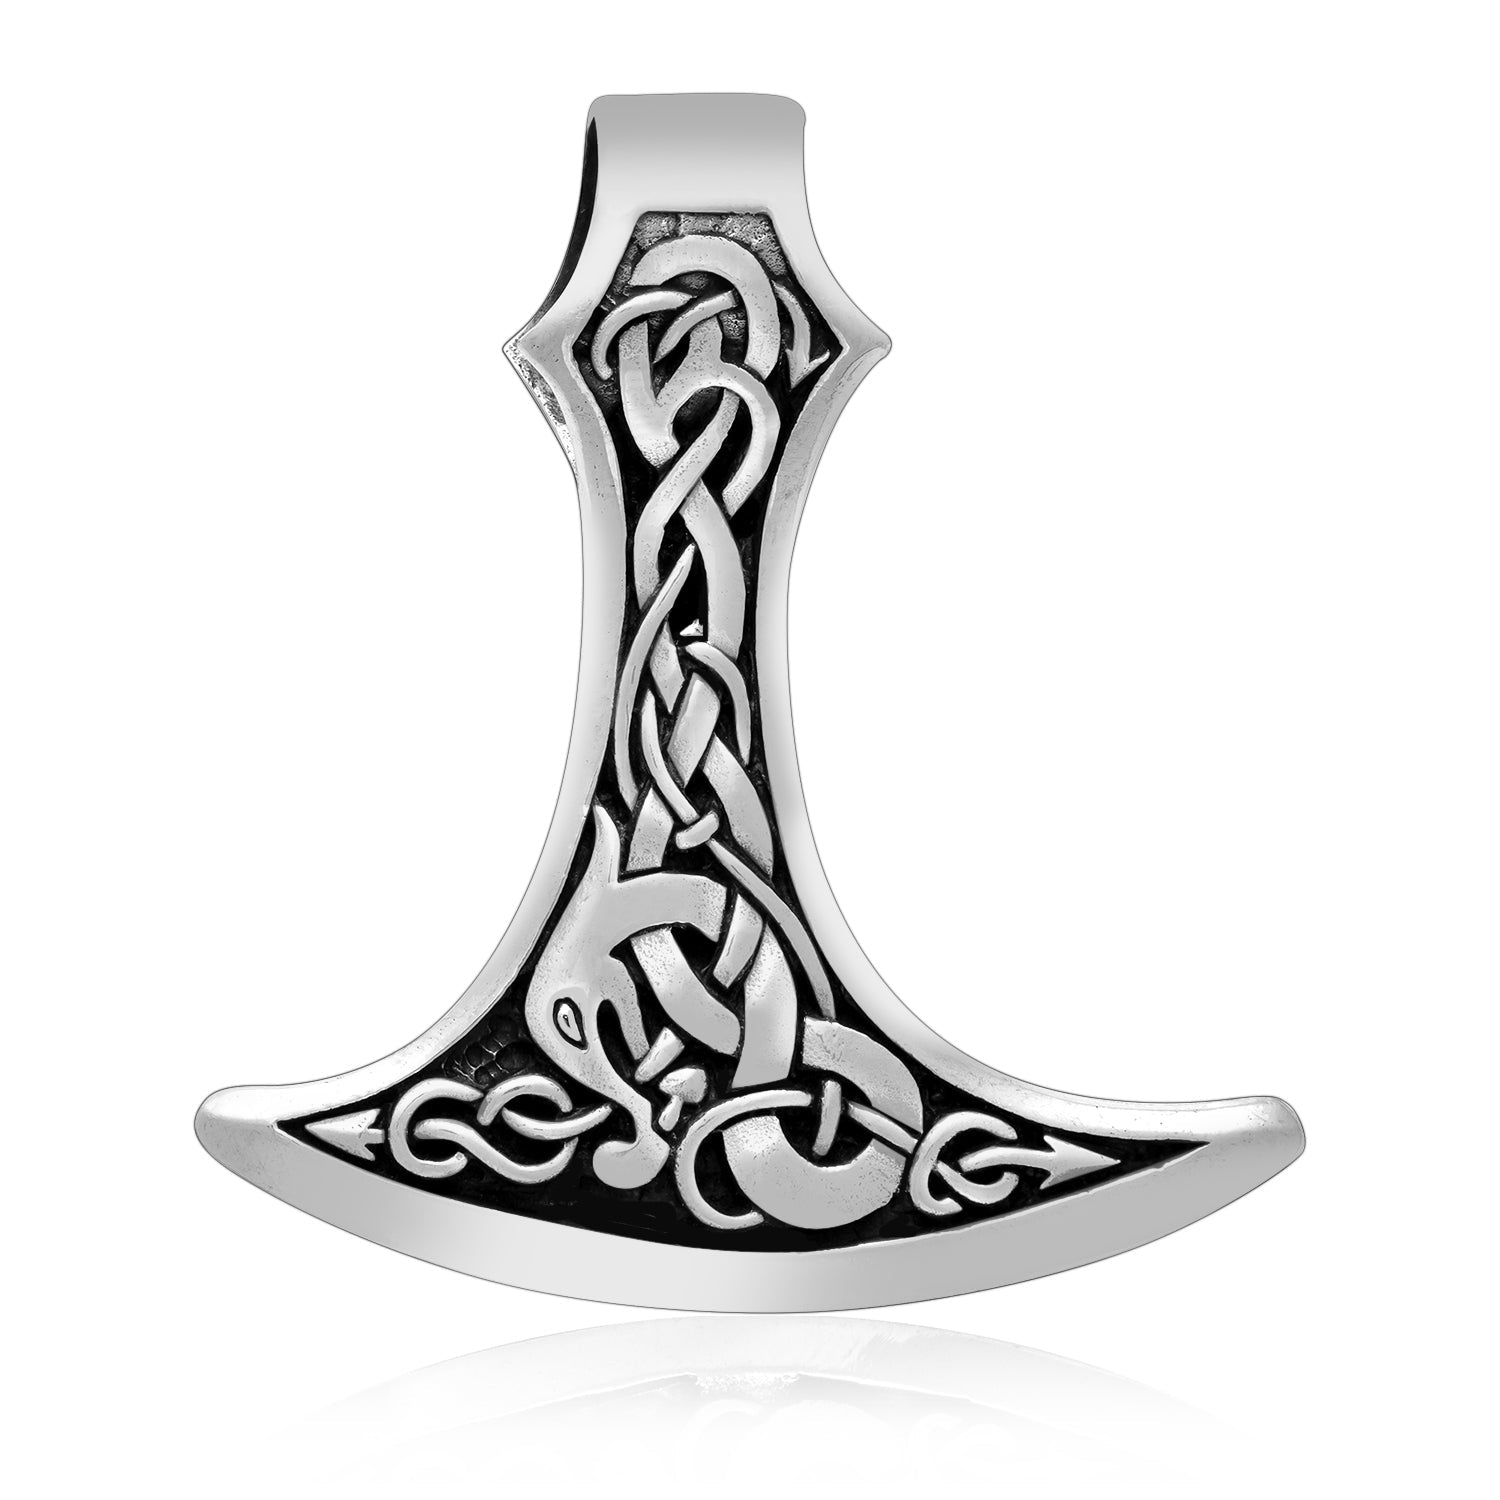 Sterling Silver Viking Axe Pendant with Jormungand